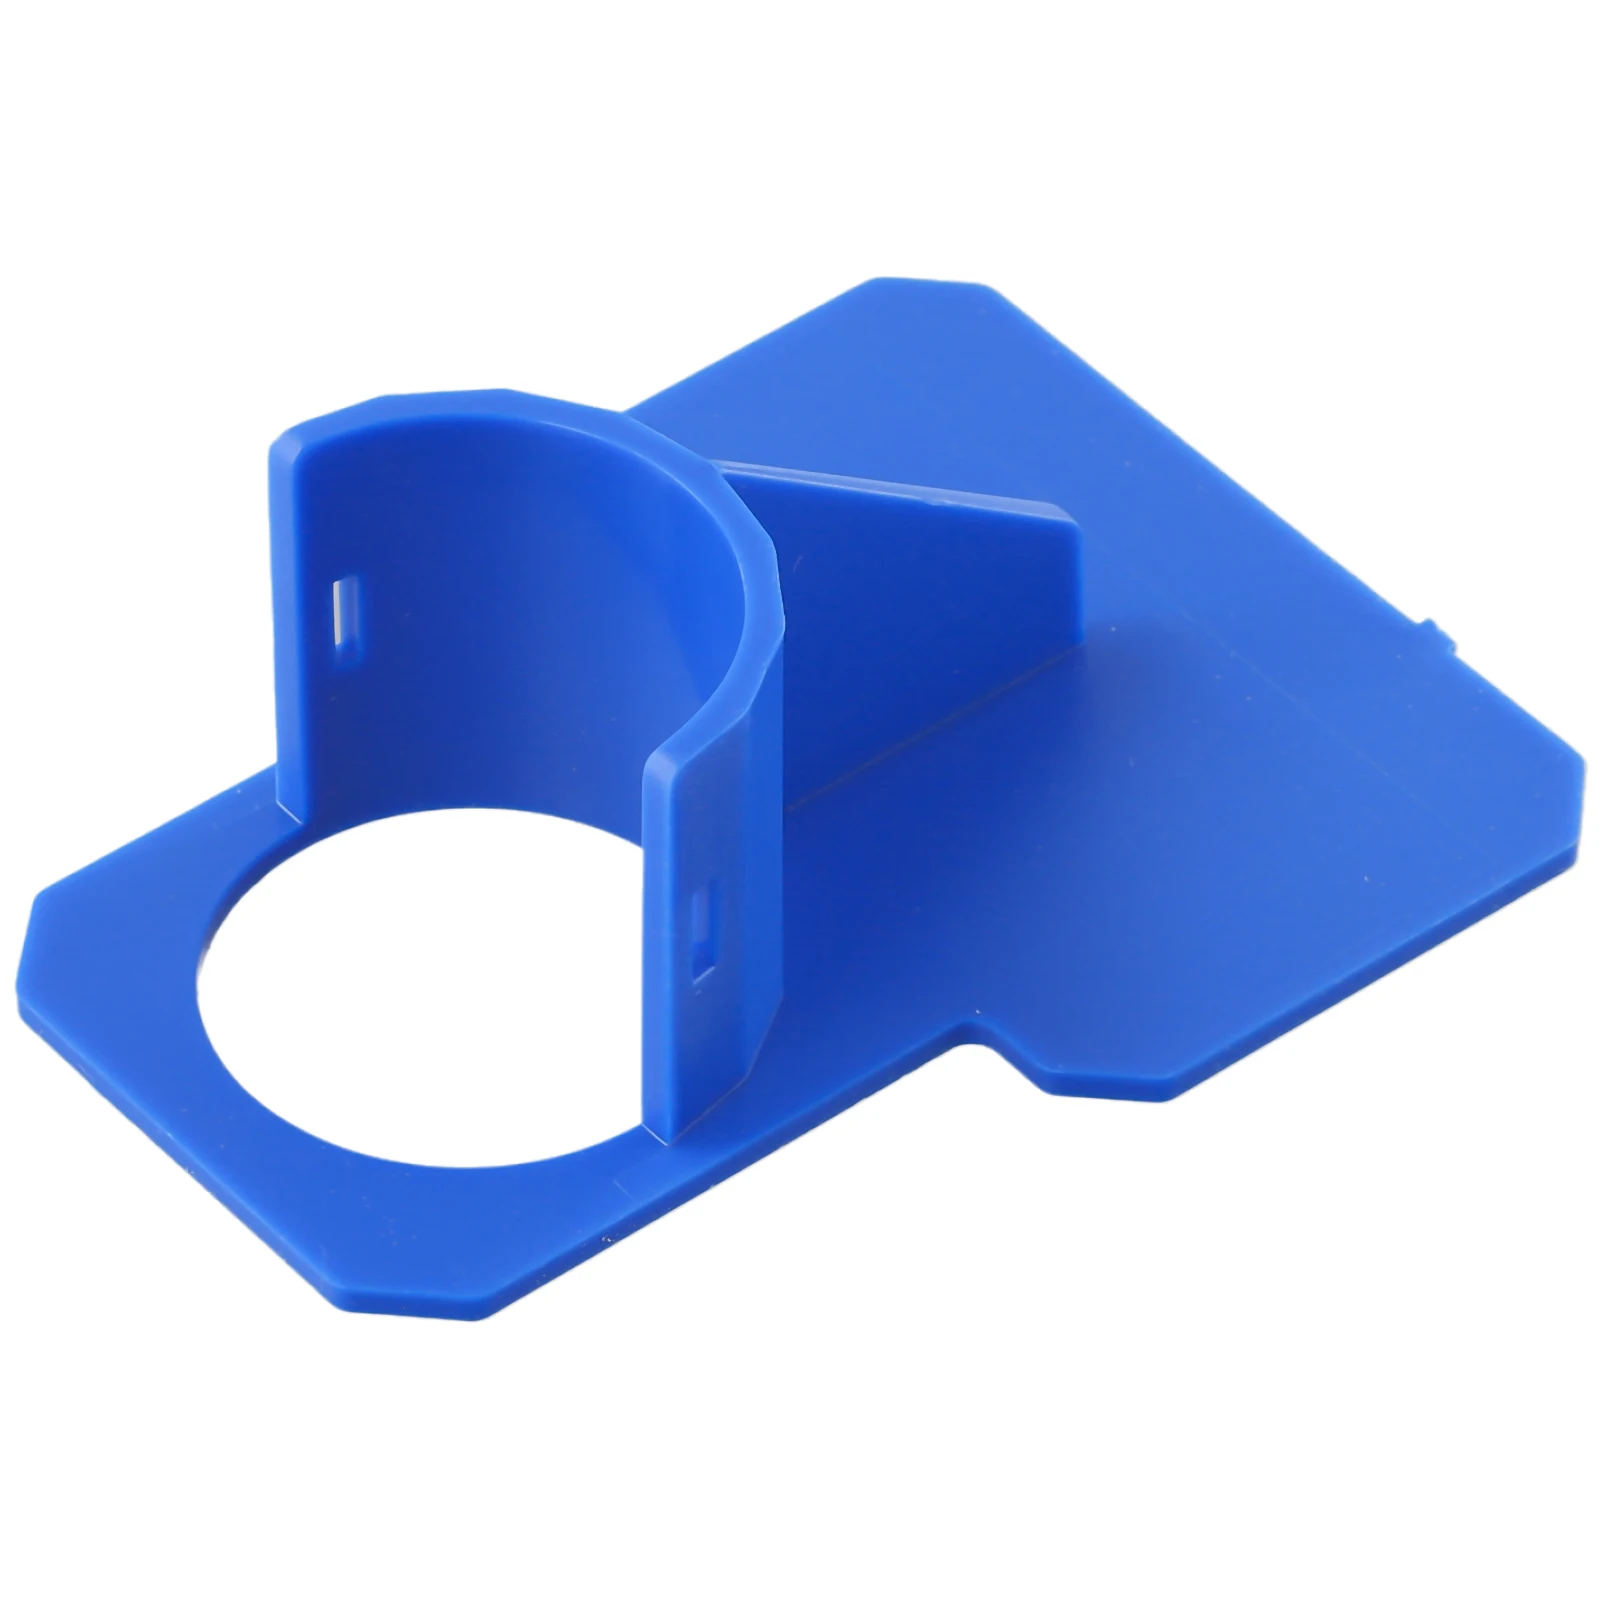 Pipe Holder For Above Ground ABS Swimming Pool Pipe Fixing Holder Mount Supports 12*10*3.8cm For 1.25in/1.5inch Hose